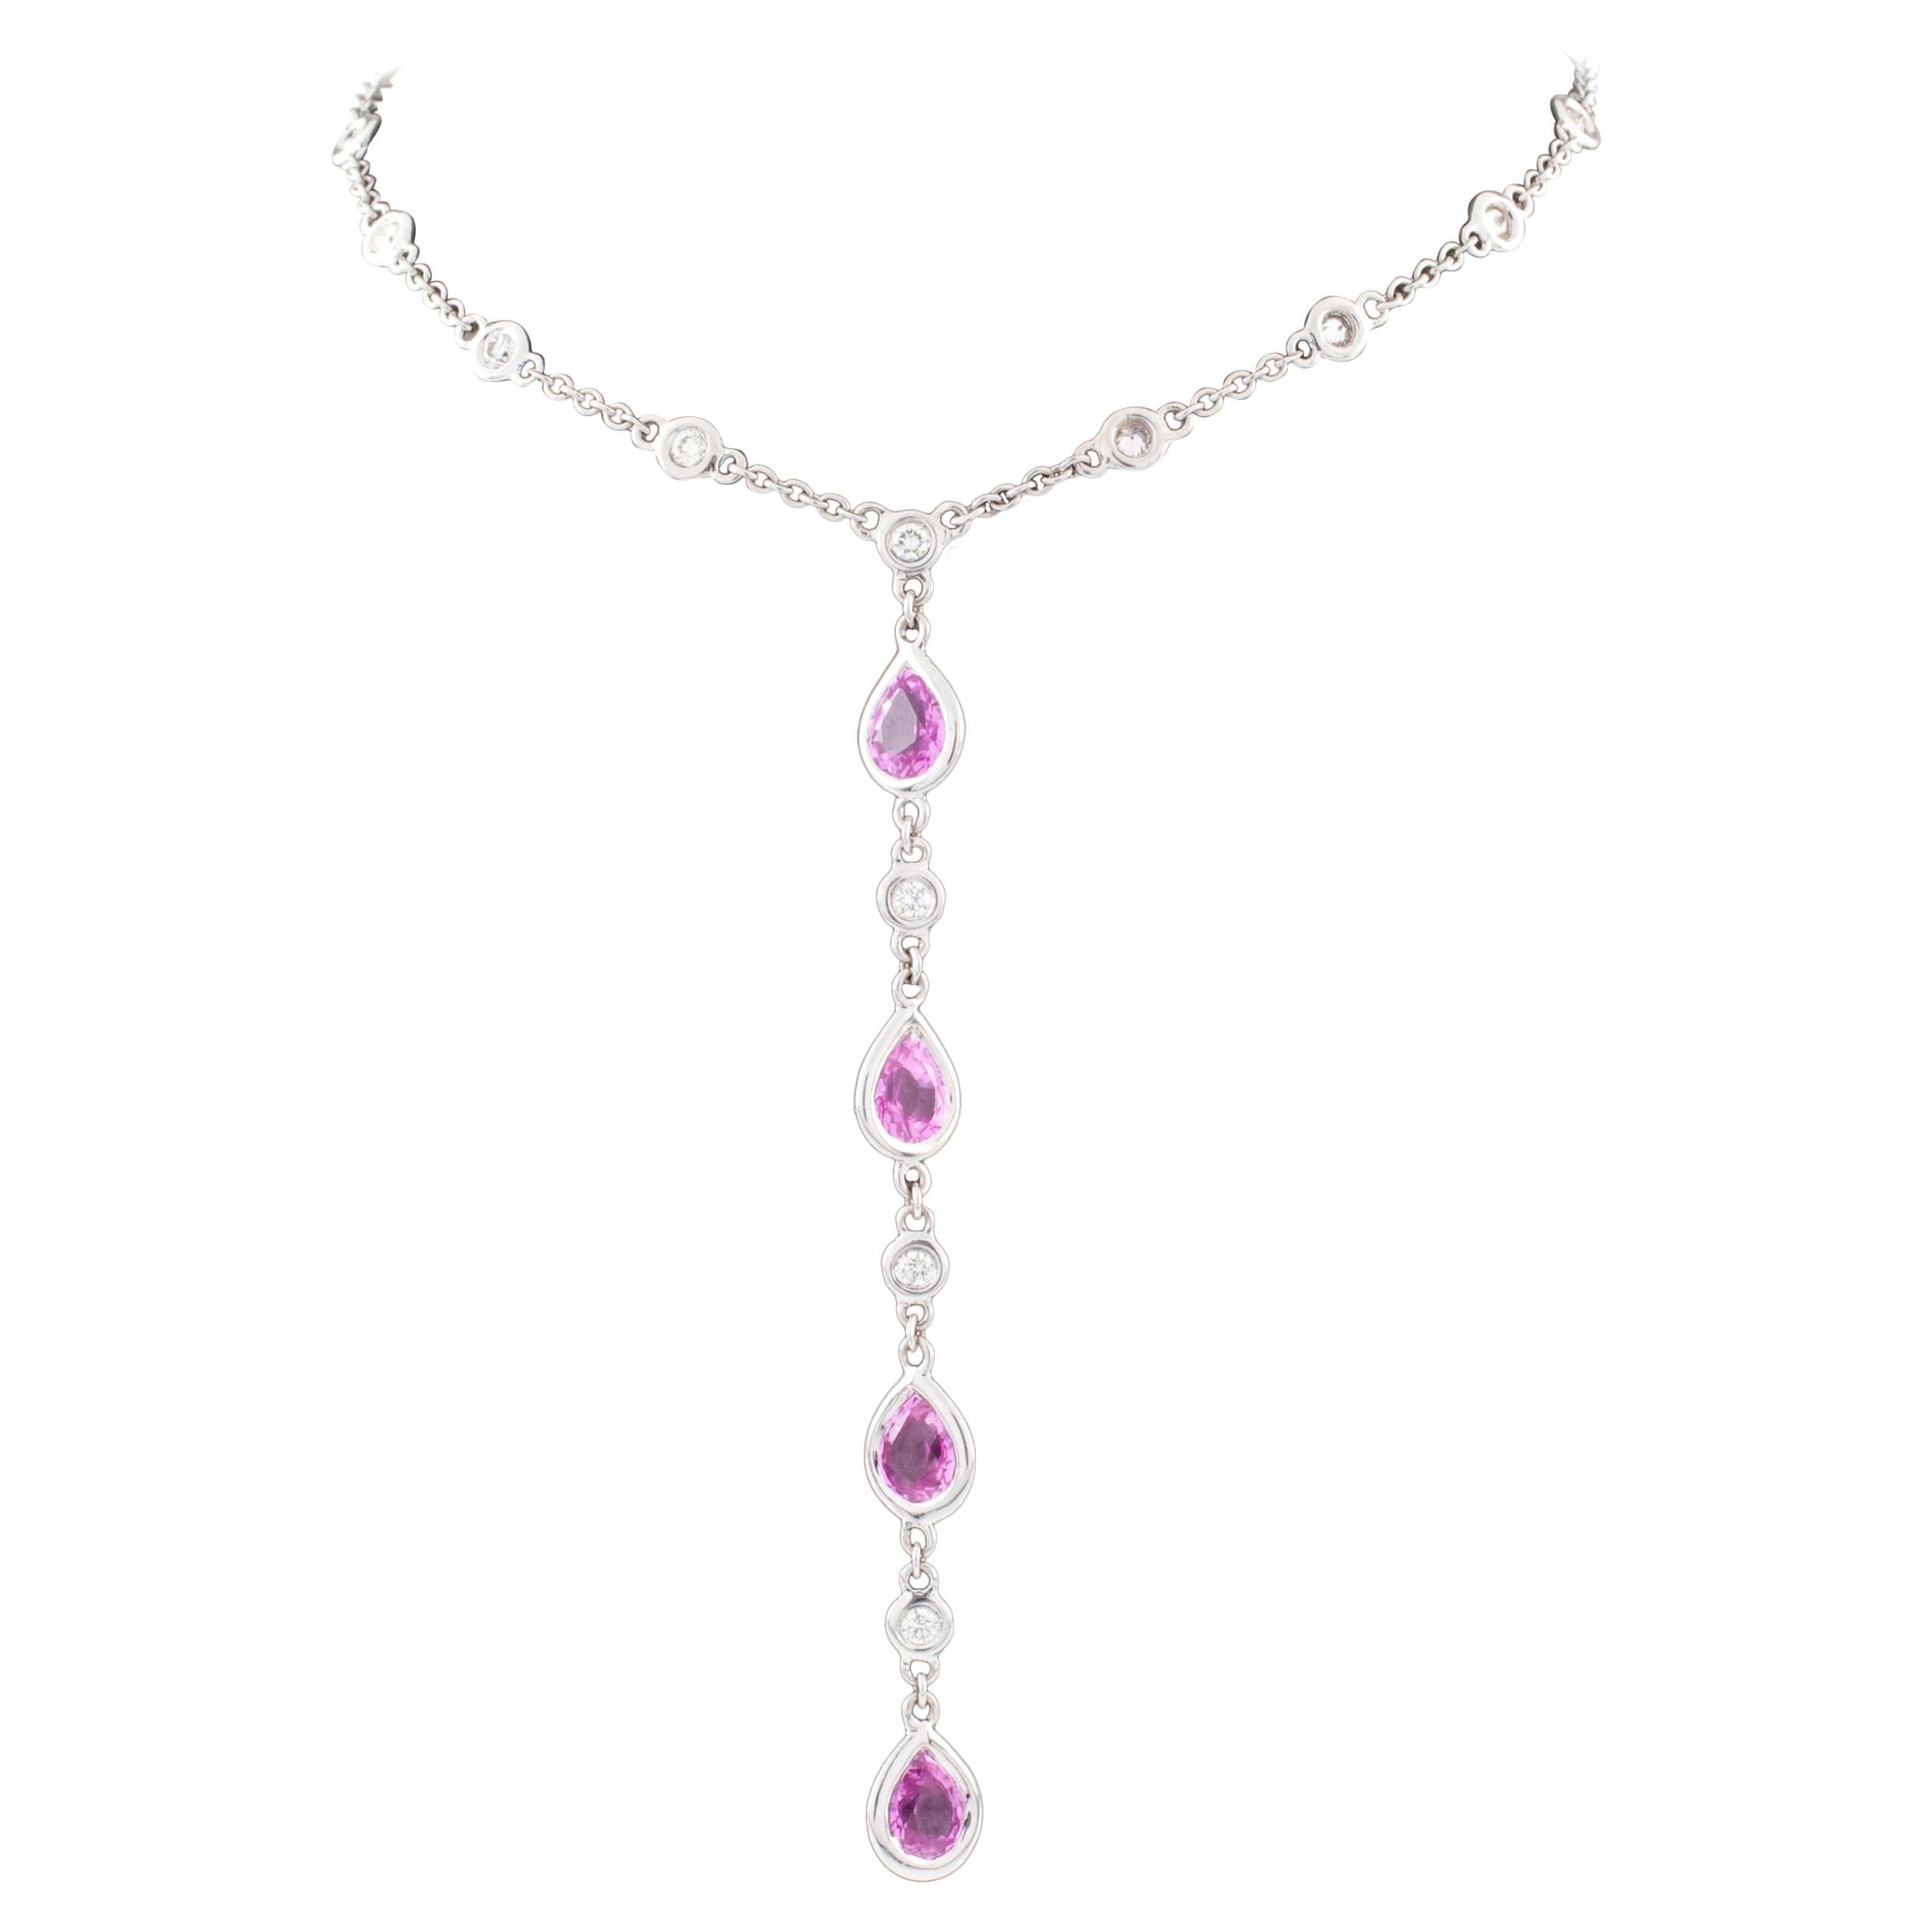 4.2 Carat Diamond and Pink Sapphire White Gold Necklace with Drop ...